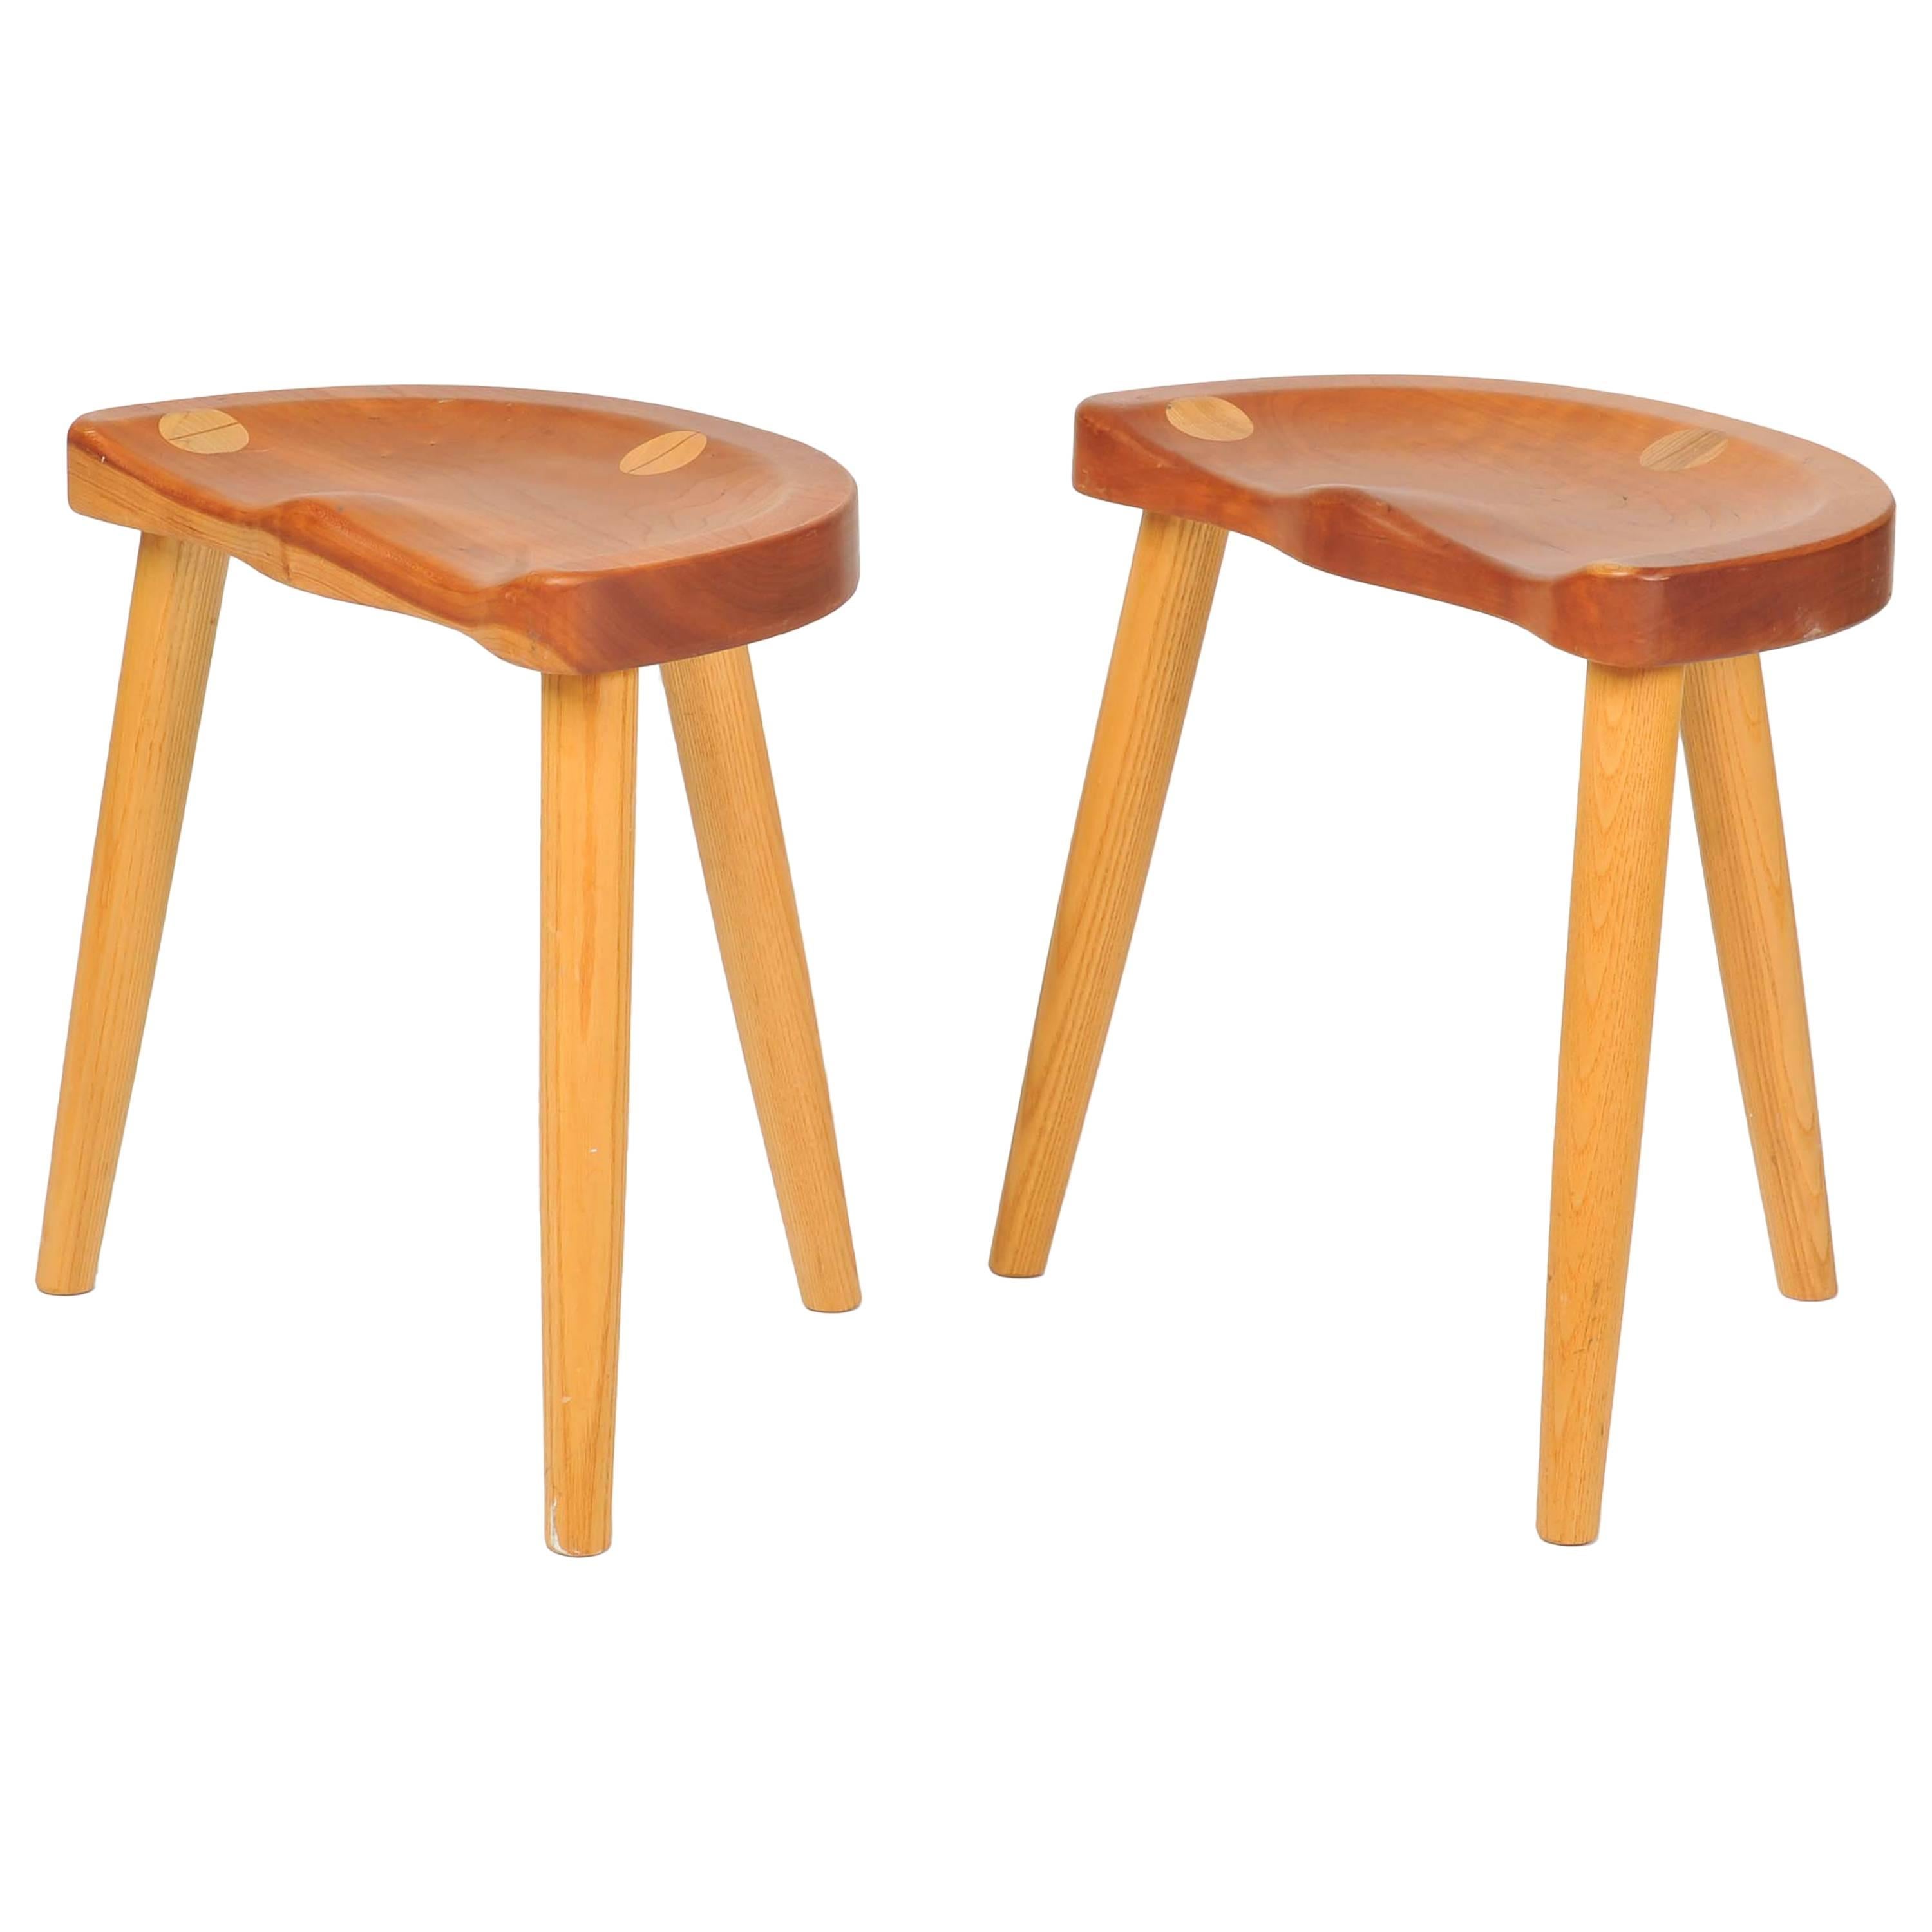 Handcrafted Tripod Studio Stools by Robert Roakes